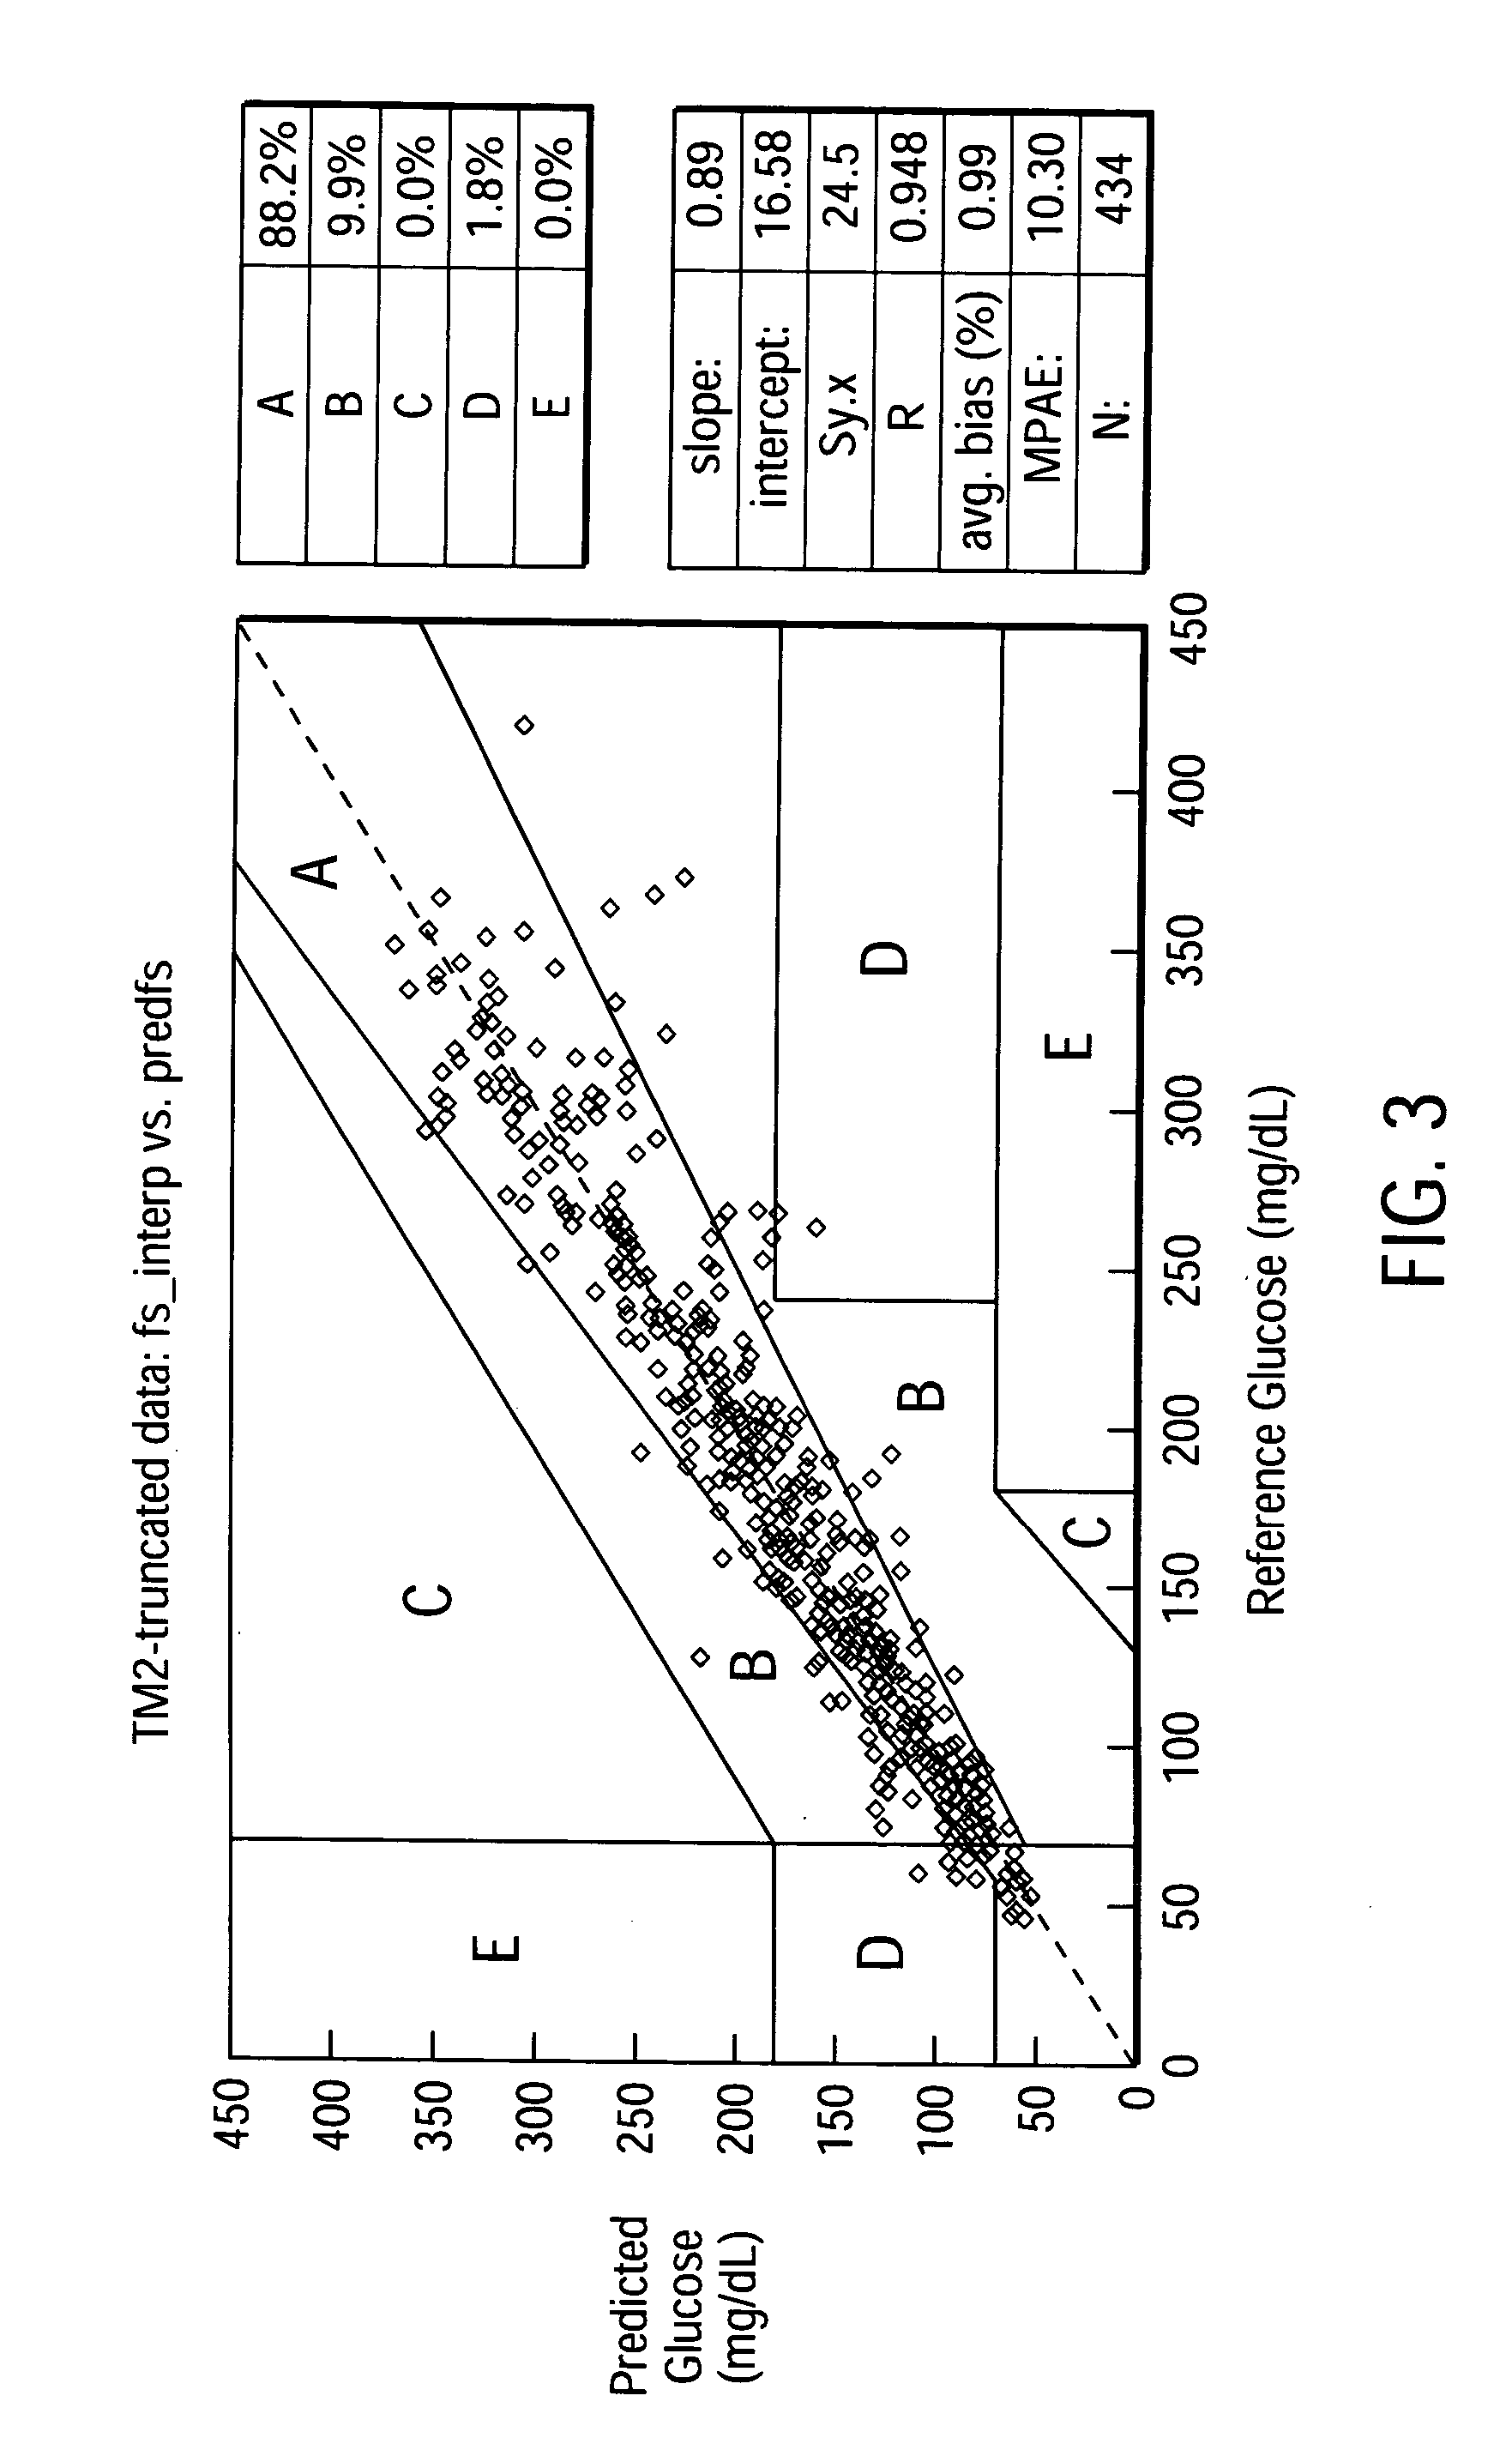 Analytical device with prediction module and related methods